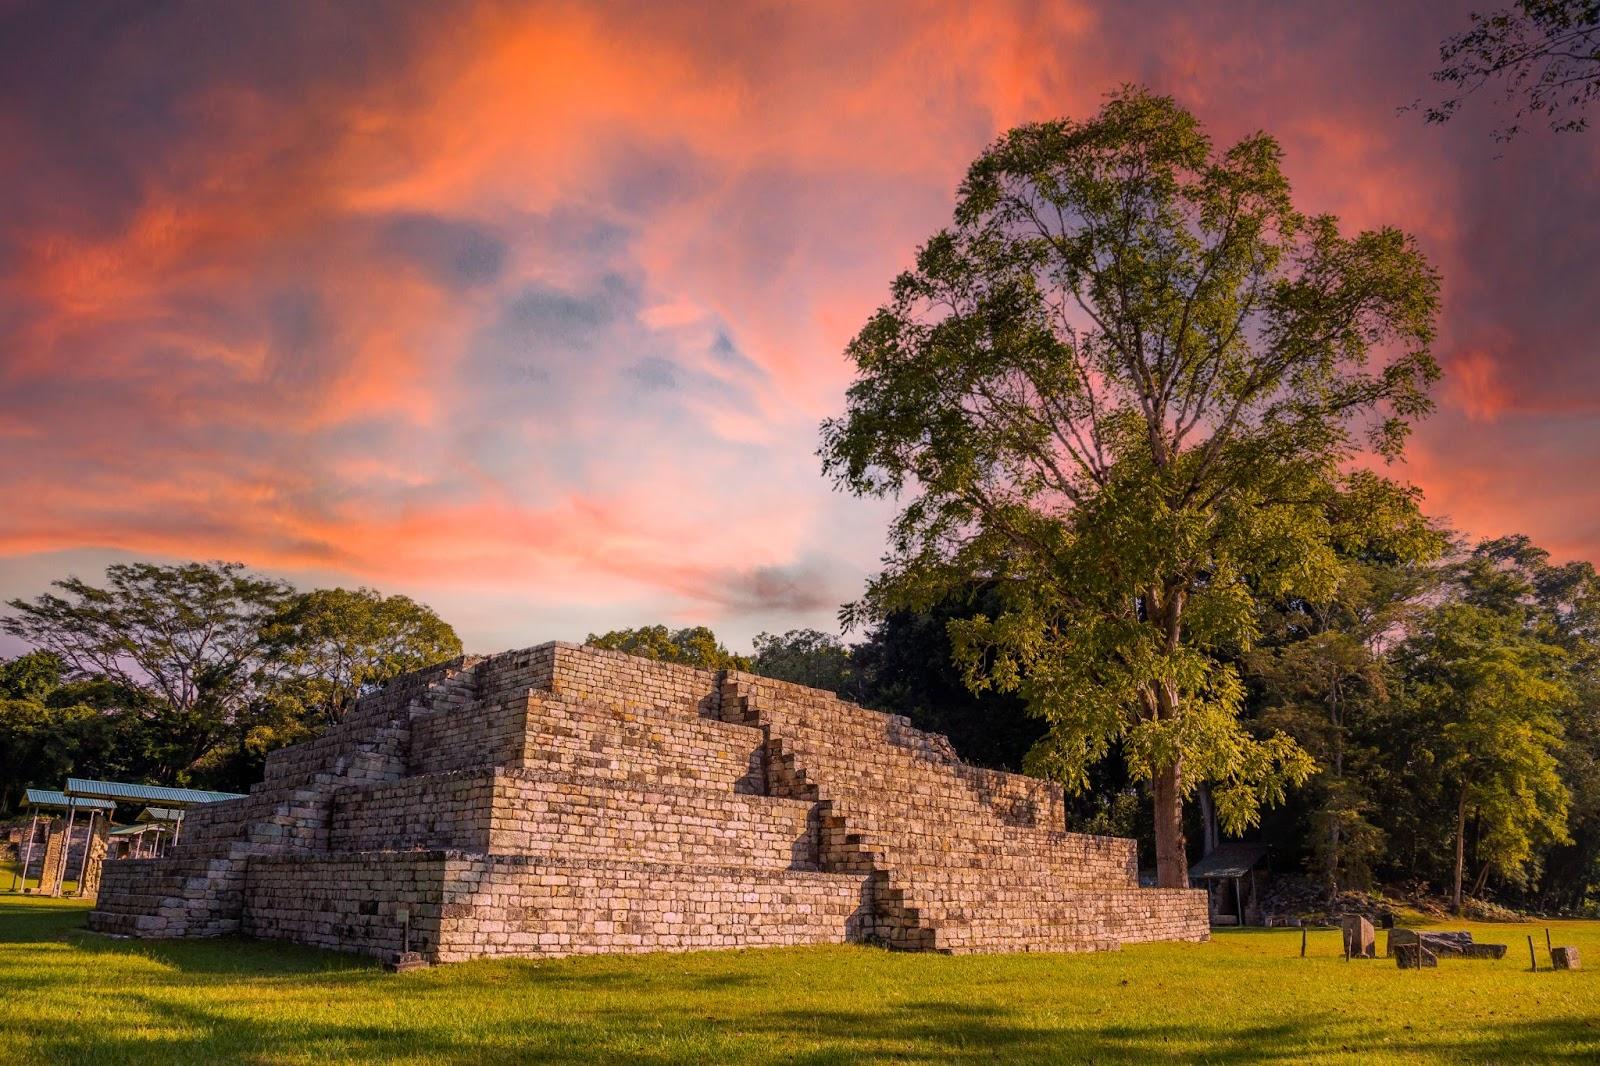 A Mayan pyramid next to a tree at the Copán Ruinas temples in a beautiful orange sunrise. Honduras.